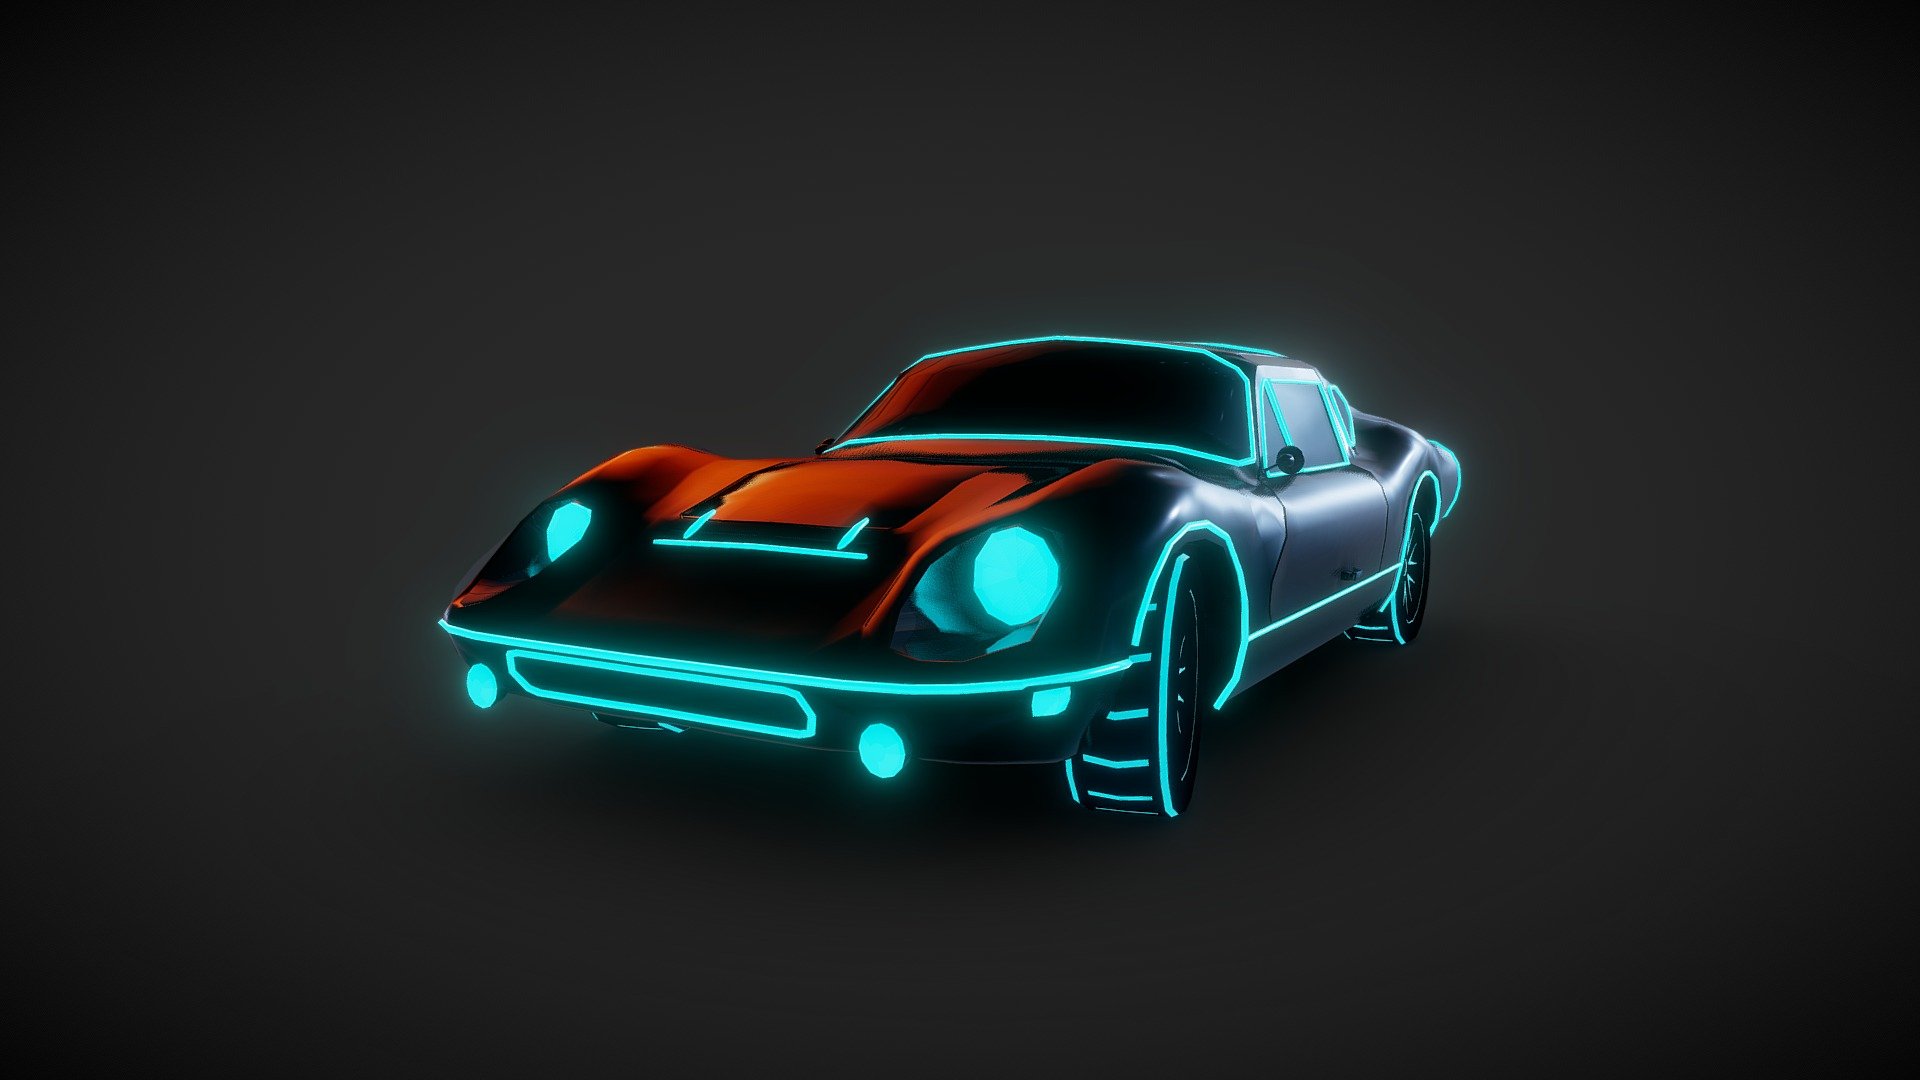 Car model made for Electro Ride game http://electroridegame.com You can add game to your Whishlist now! https://store.steampowered.com/app/696150 We are going to PC and Nintendo Switch! Stay tuned! Code &amp; Design: Sylwester Osik Graphics: Robert i Wojciech Miedziocha Music: Maciej Kulesza - Electro Ride car Melk RS 10000 - 3D model by wojciechmiedziocha 3d model